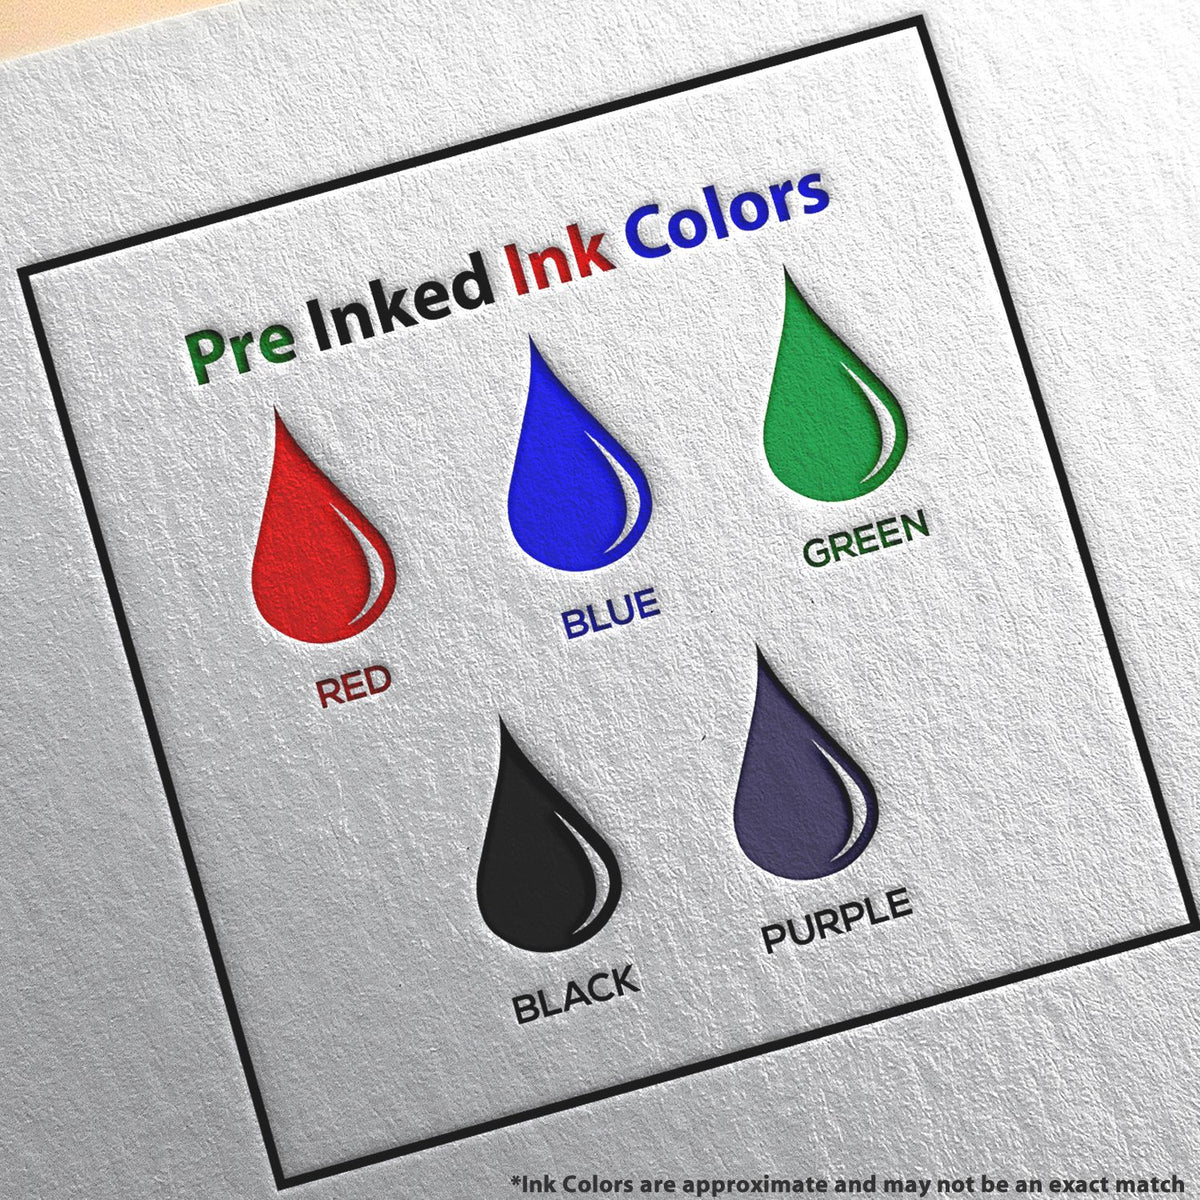 A picture showing the different ink colors or hues available for the Premium MaxLight Pre-Inked Utah Engineering Stamp product.